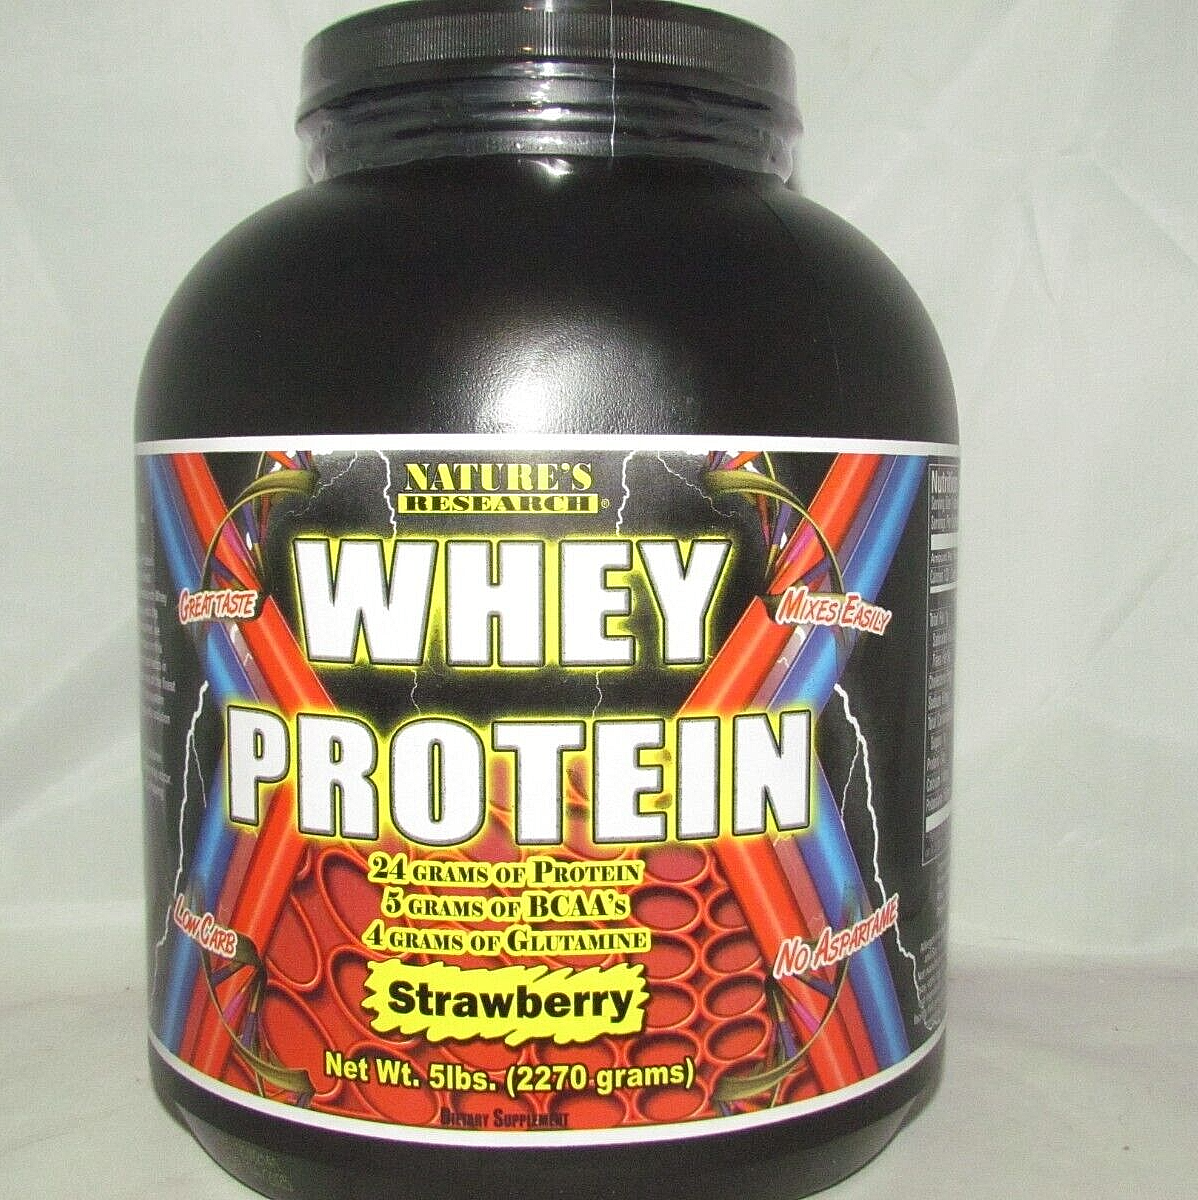 Natures Research Whey Protein 5lbs strawberry flavor - $54.40